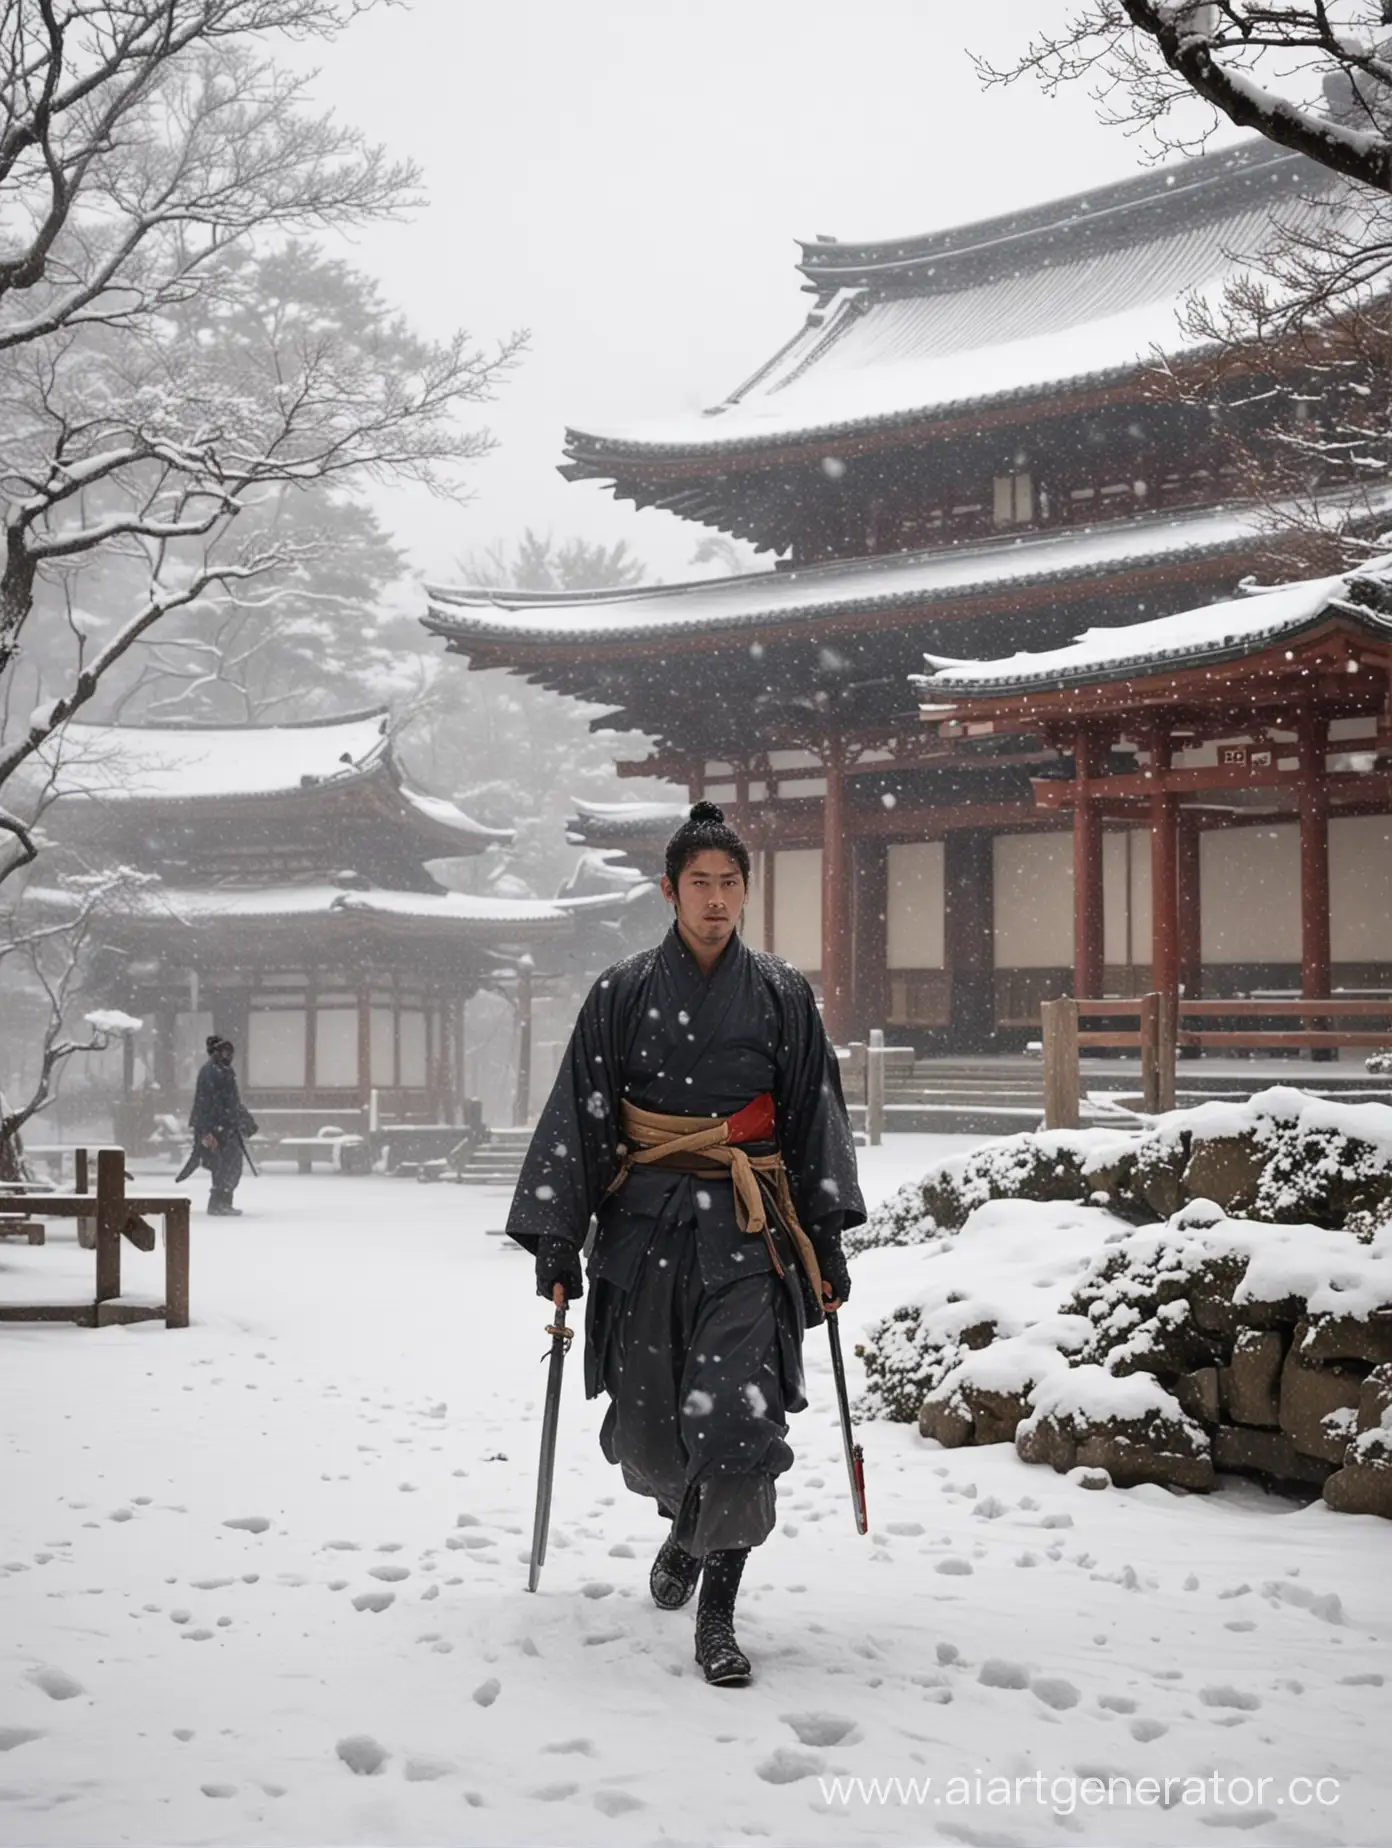 Student-Assists-Injured-Samurai-to-Japanese-Temple-in-Snow